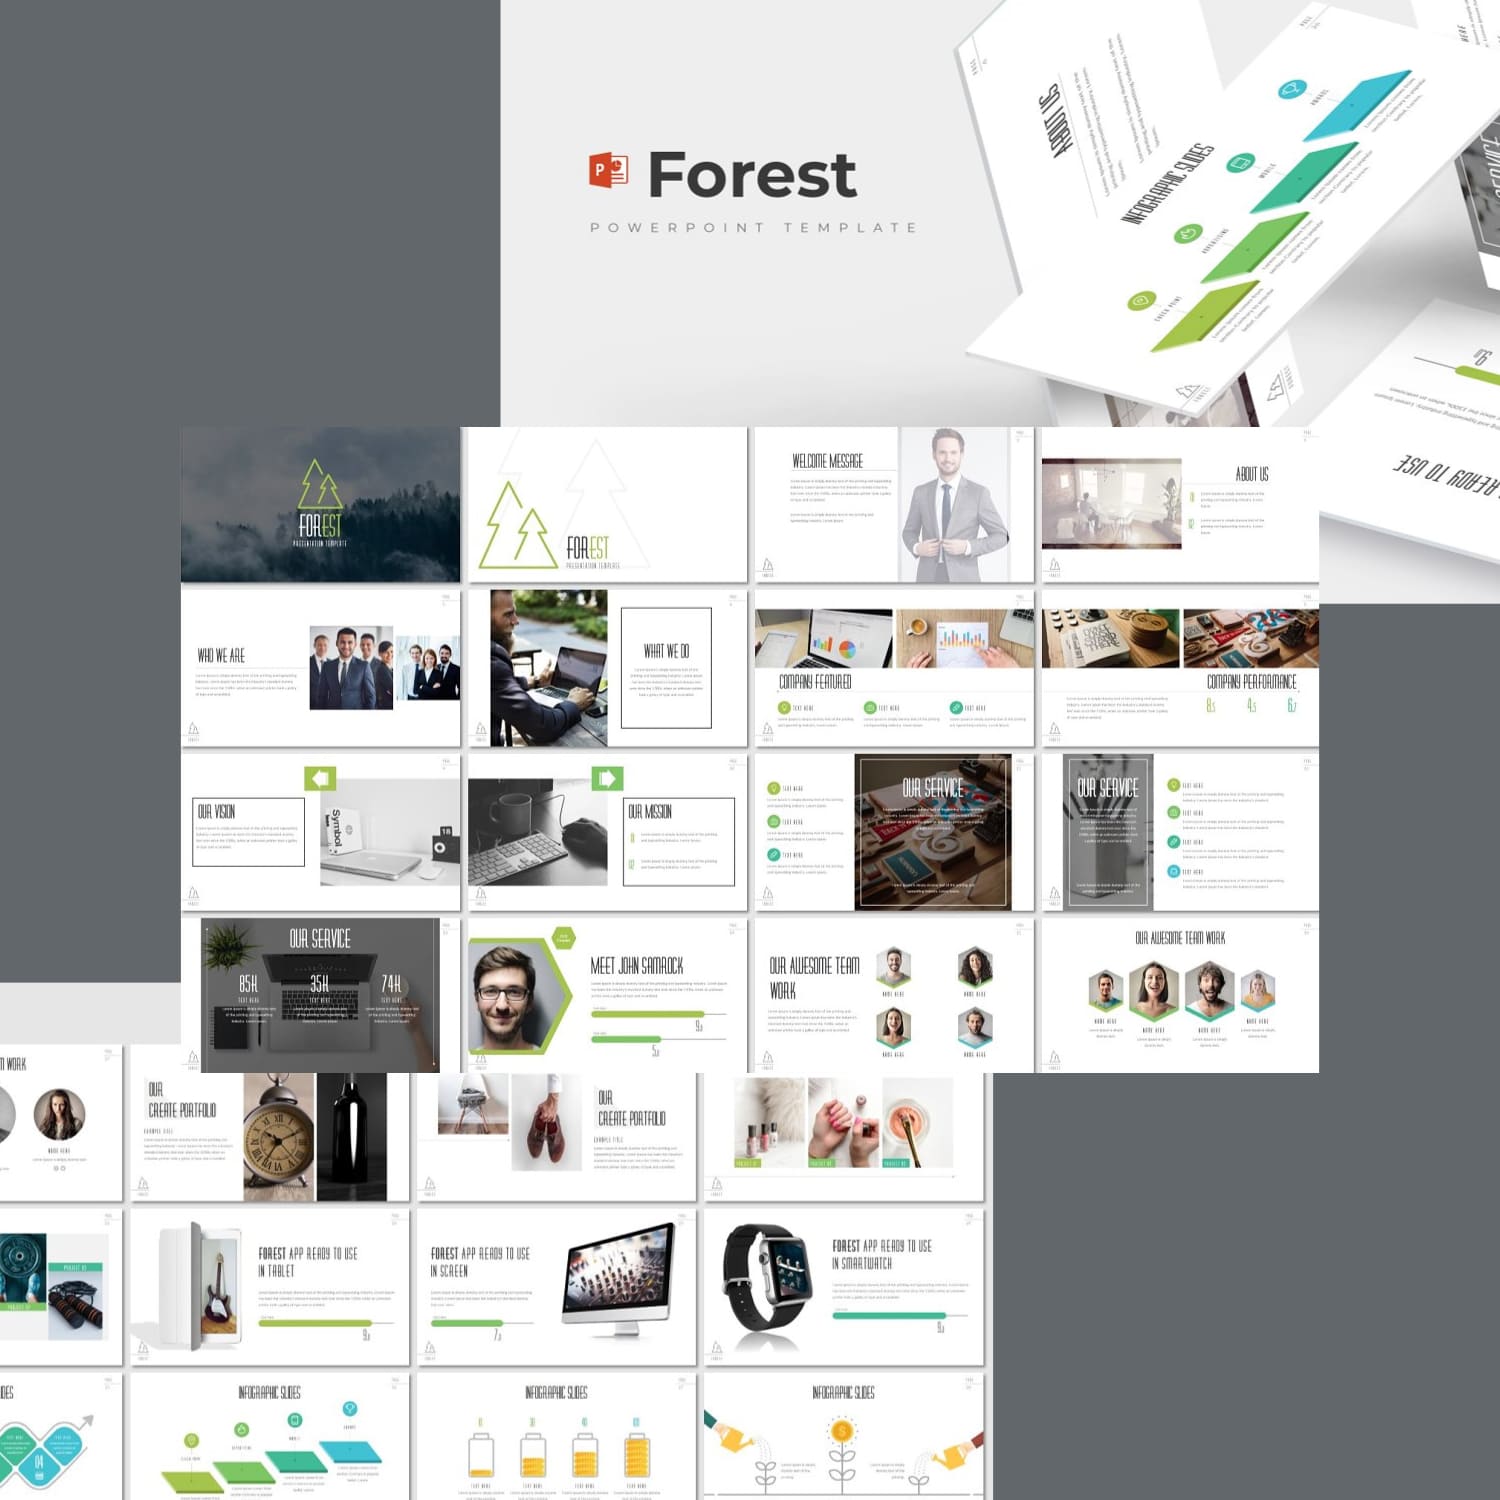 Forest - Presentation Template is a minimalistic, creative, unique presentation template.